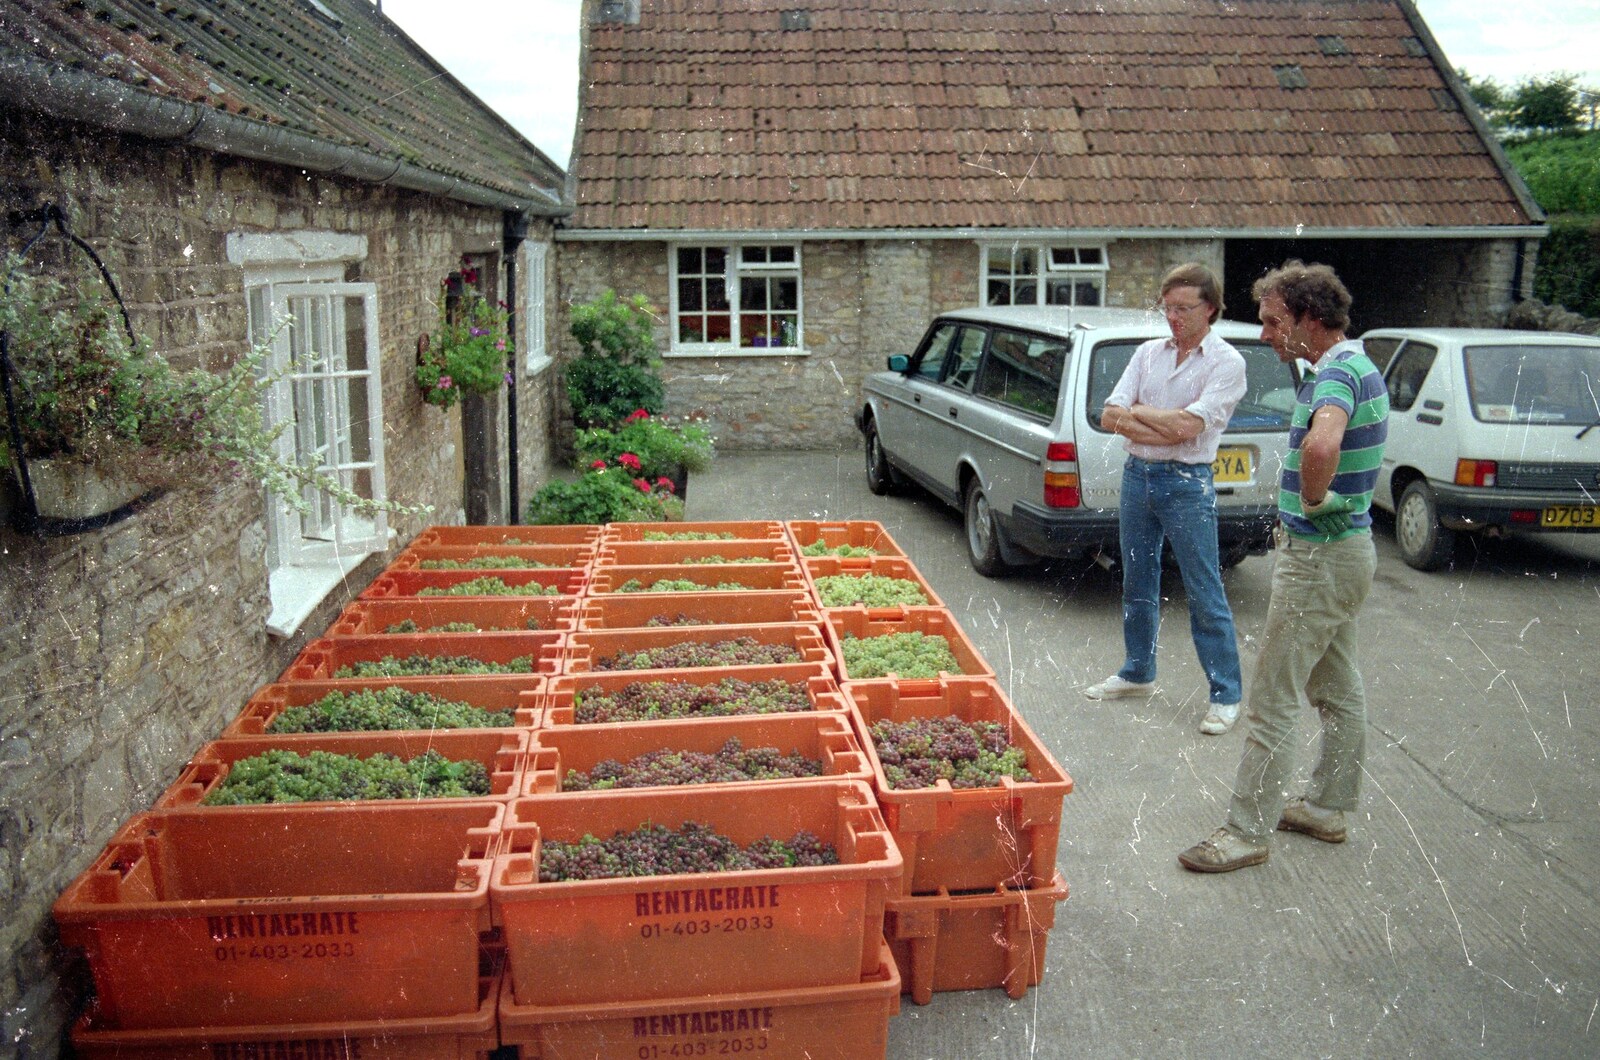 The Harrow harvest outside Wootton Winery from Harrow Vineyard Harvest and Wootton Winery, Dorset and Somerset - 5th September 1989